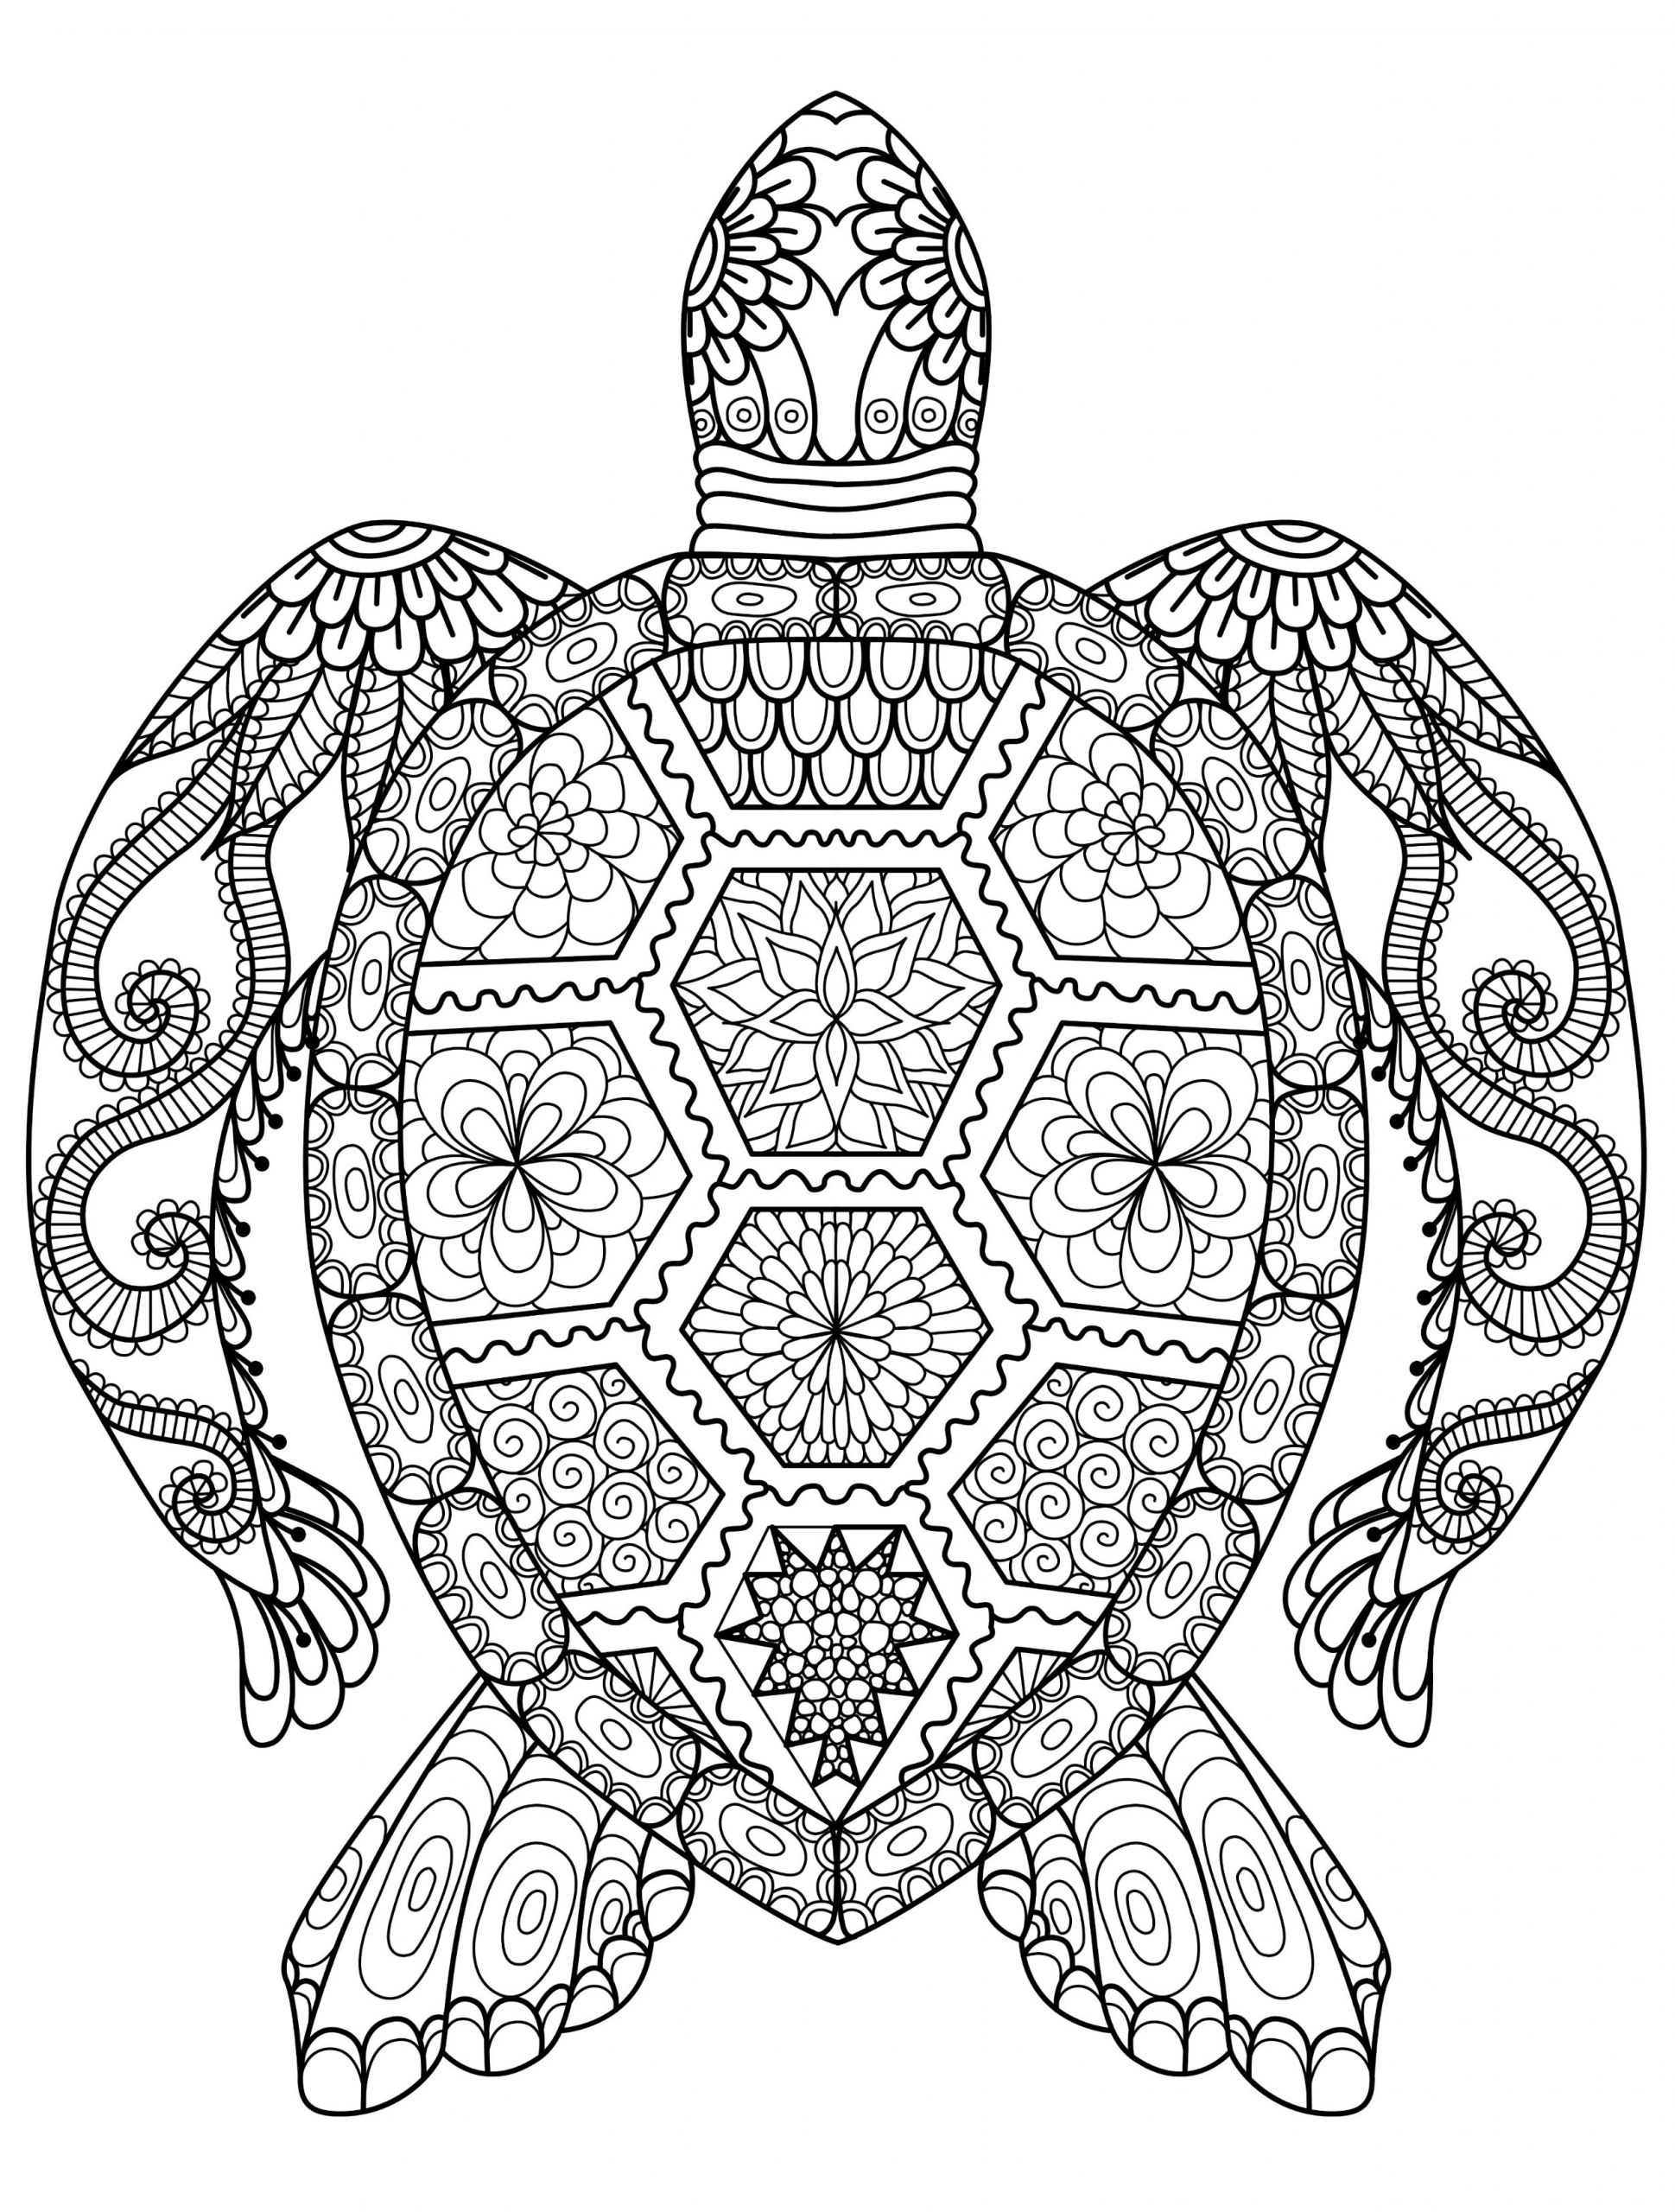 Adult Coloring Books Animals
 Animal Coloring Pages for Adults Best Coloring Pages For